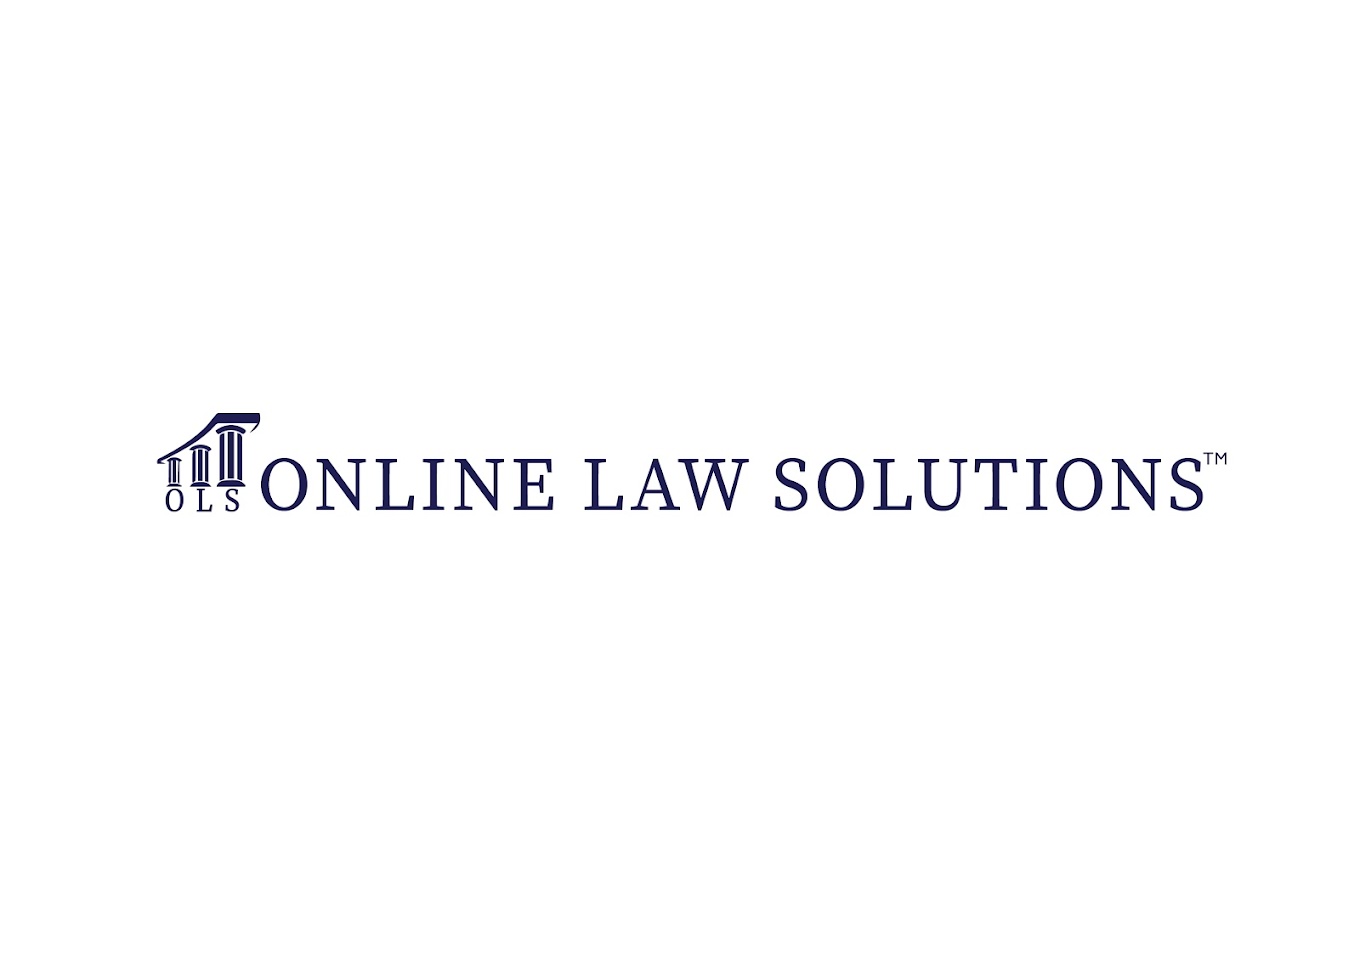 Online Law Solutions (Author)